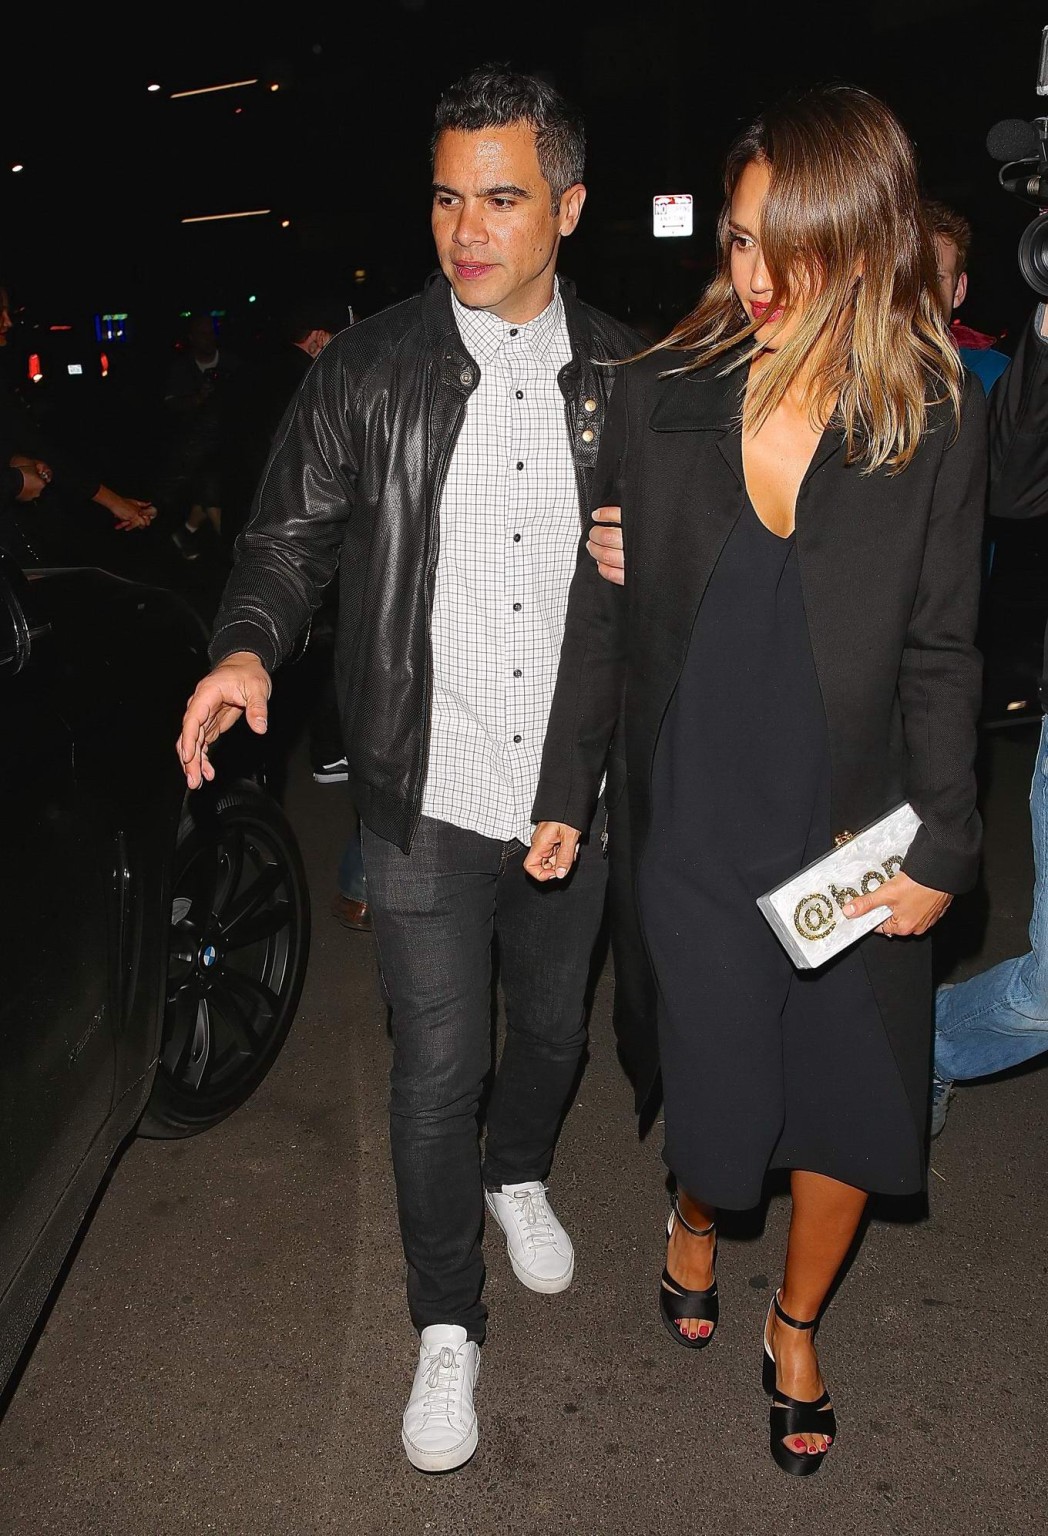 Jessica Alba shows cleavage leaving a club in Los Angeles #75170664